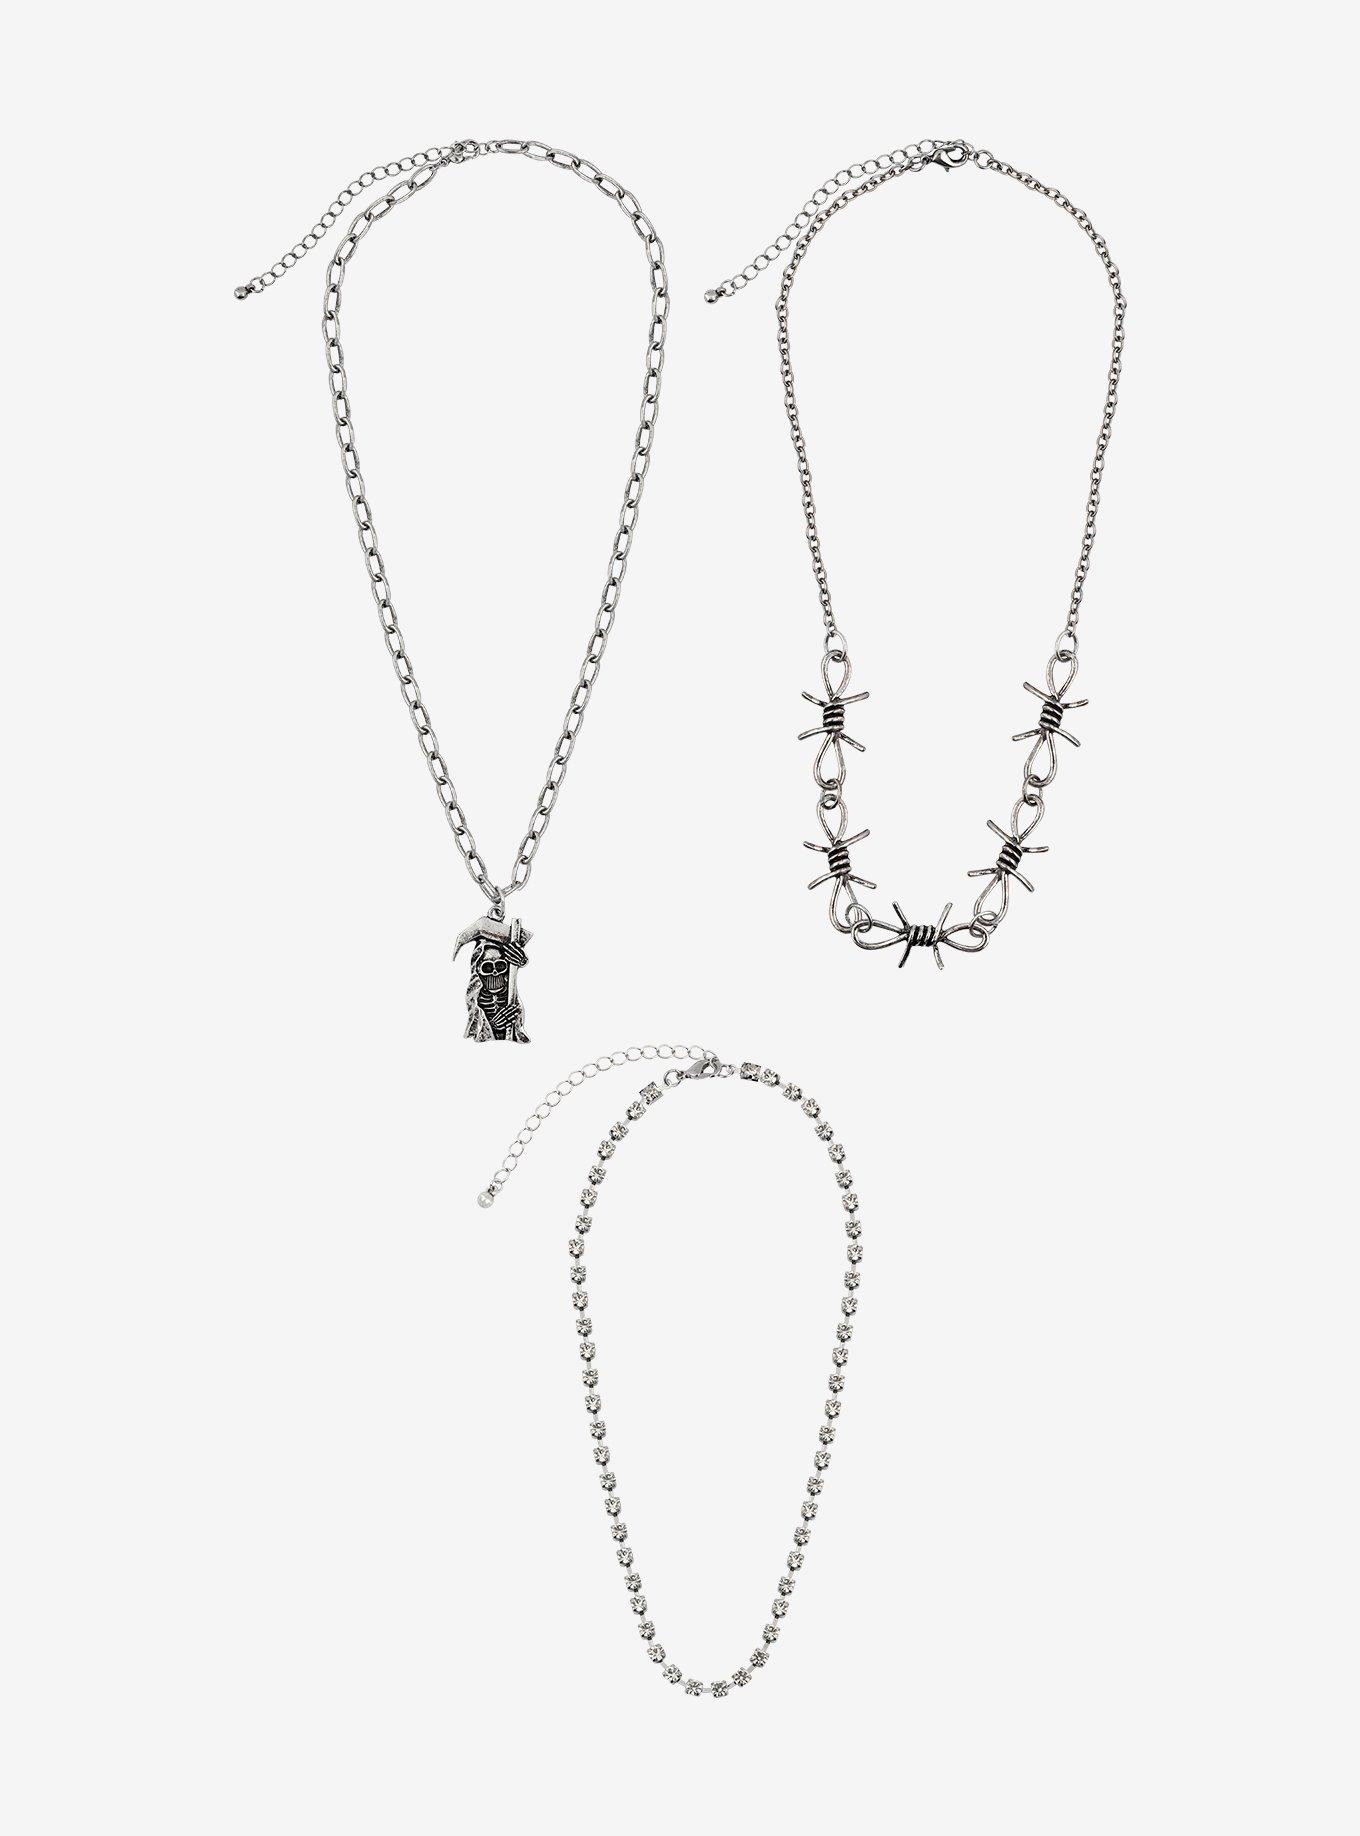 Reaper Barbed Wire Necklace Set